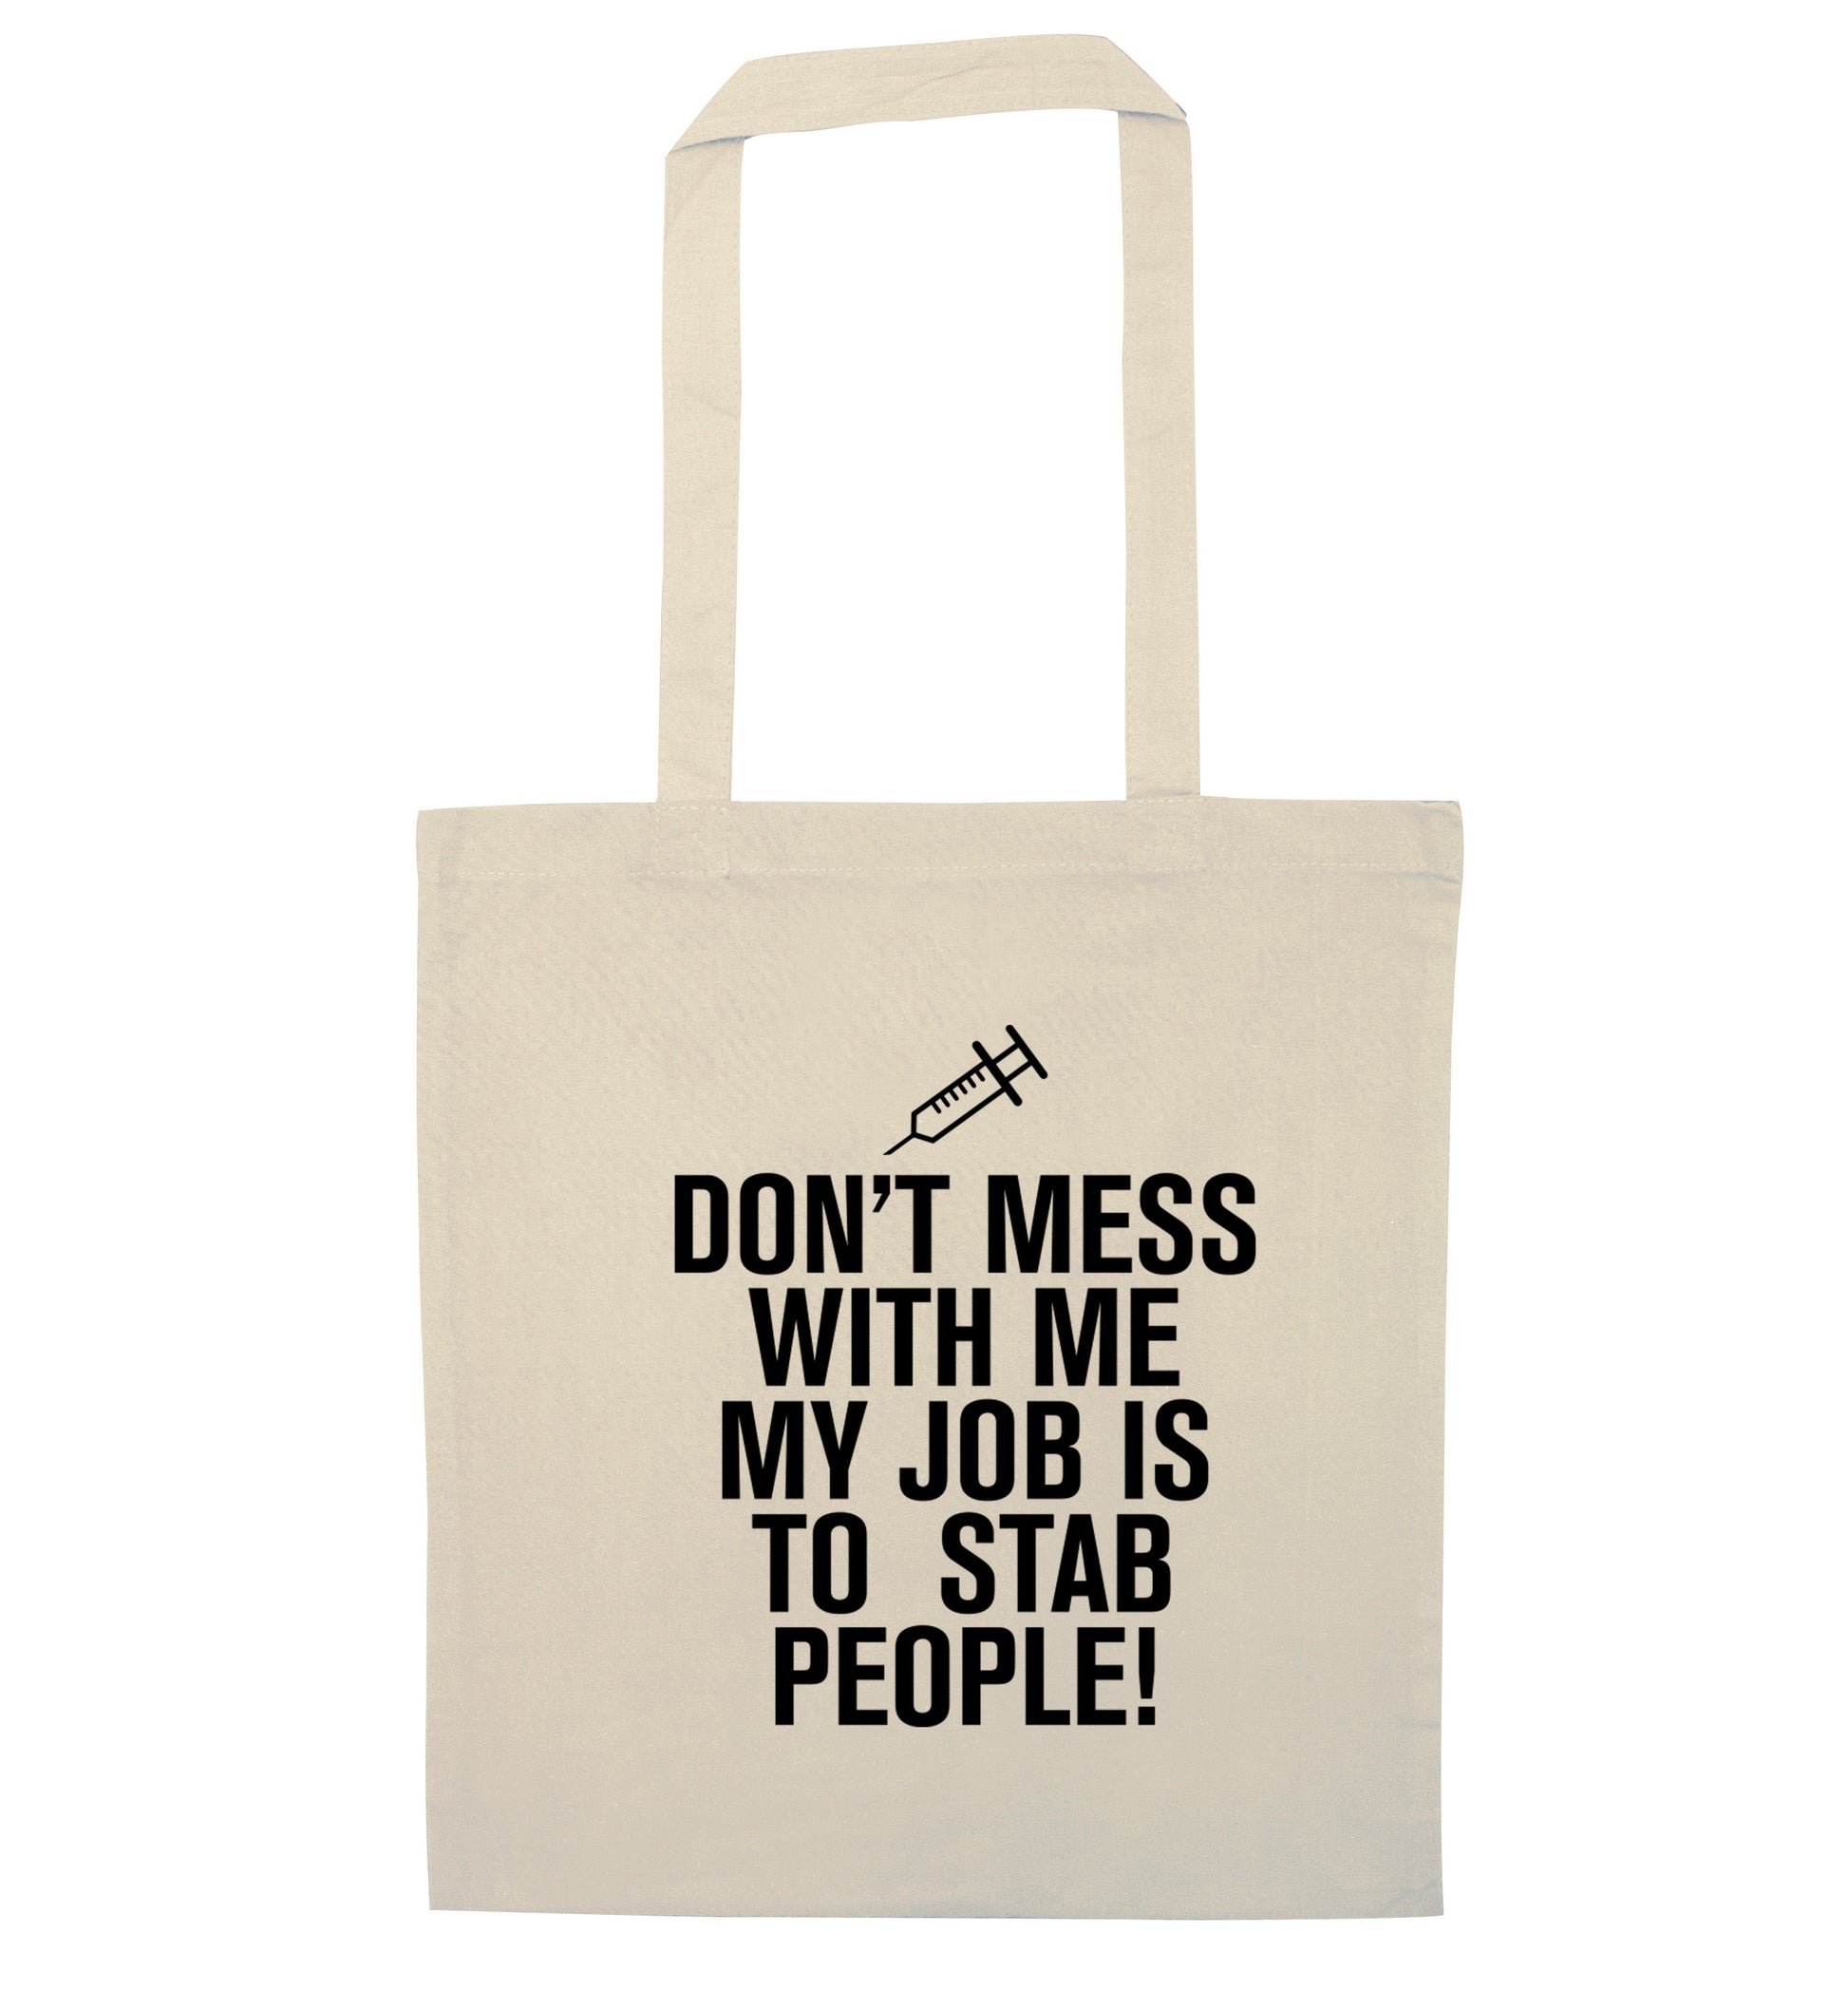 Don't mess with me my job is to stab people! natural tote bag